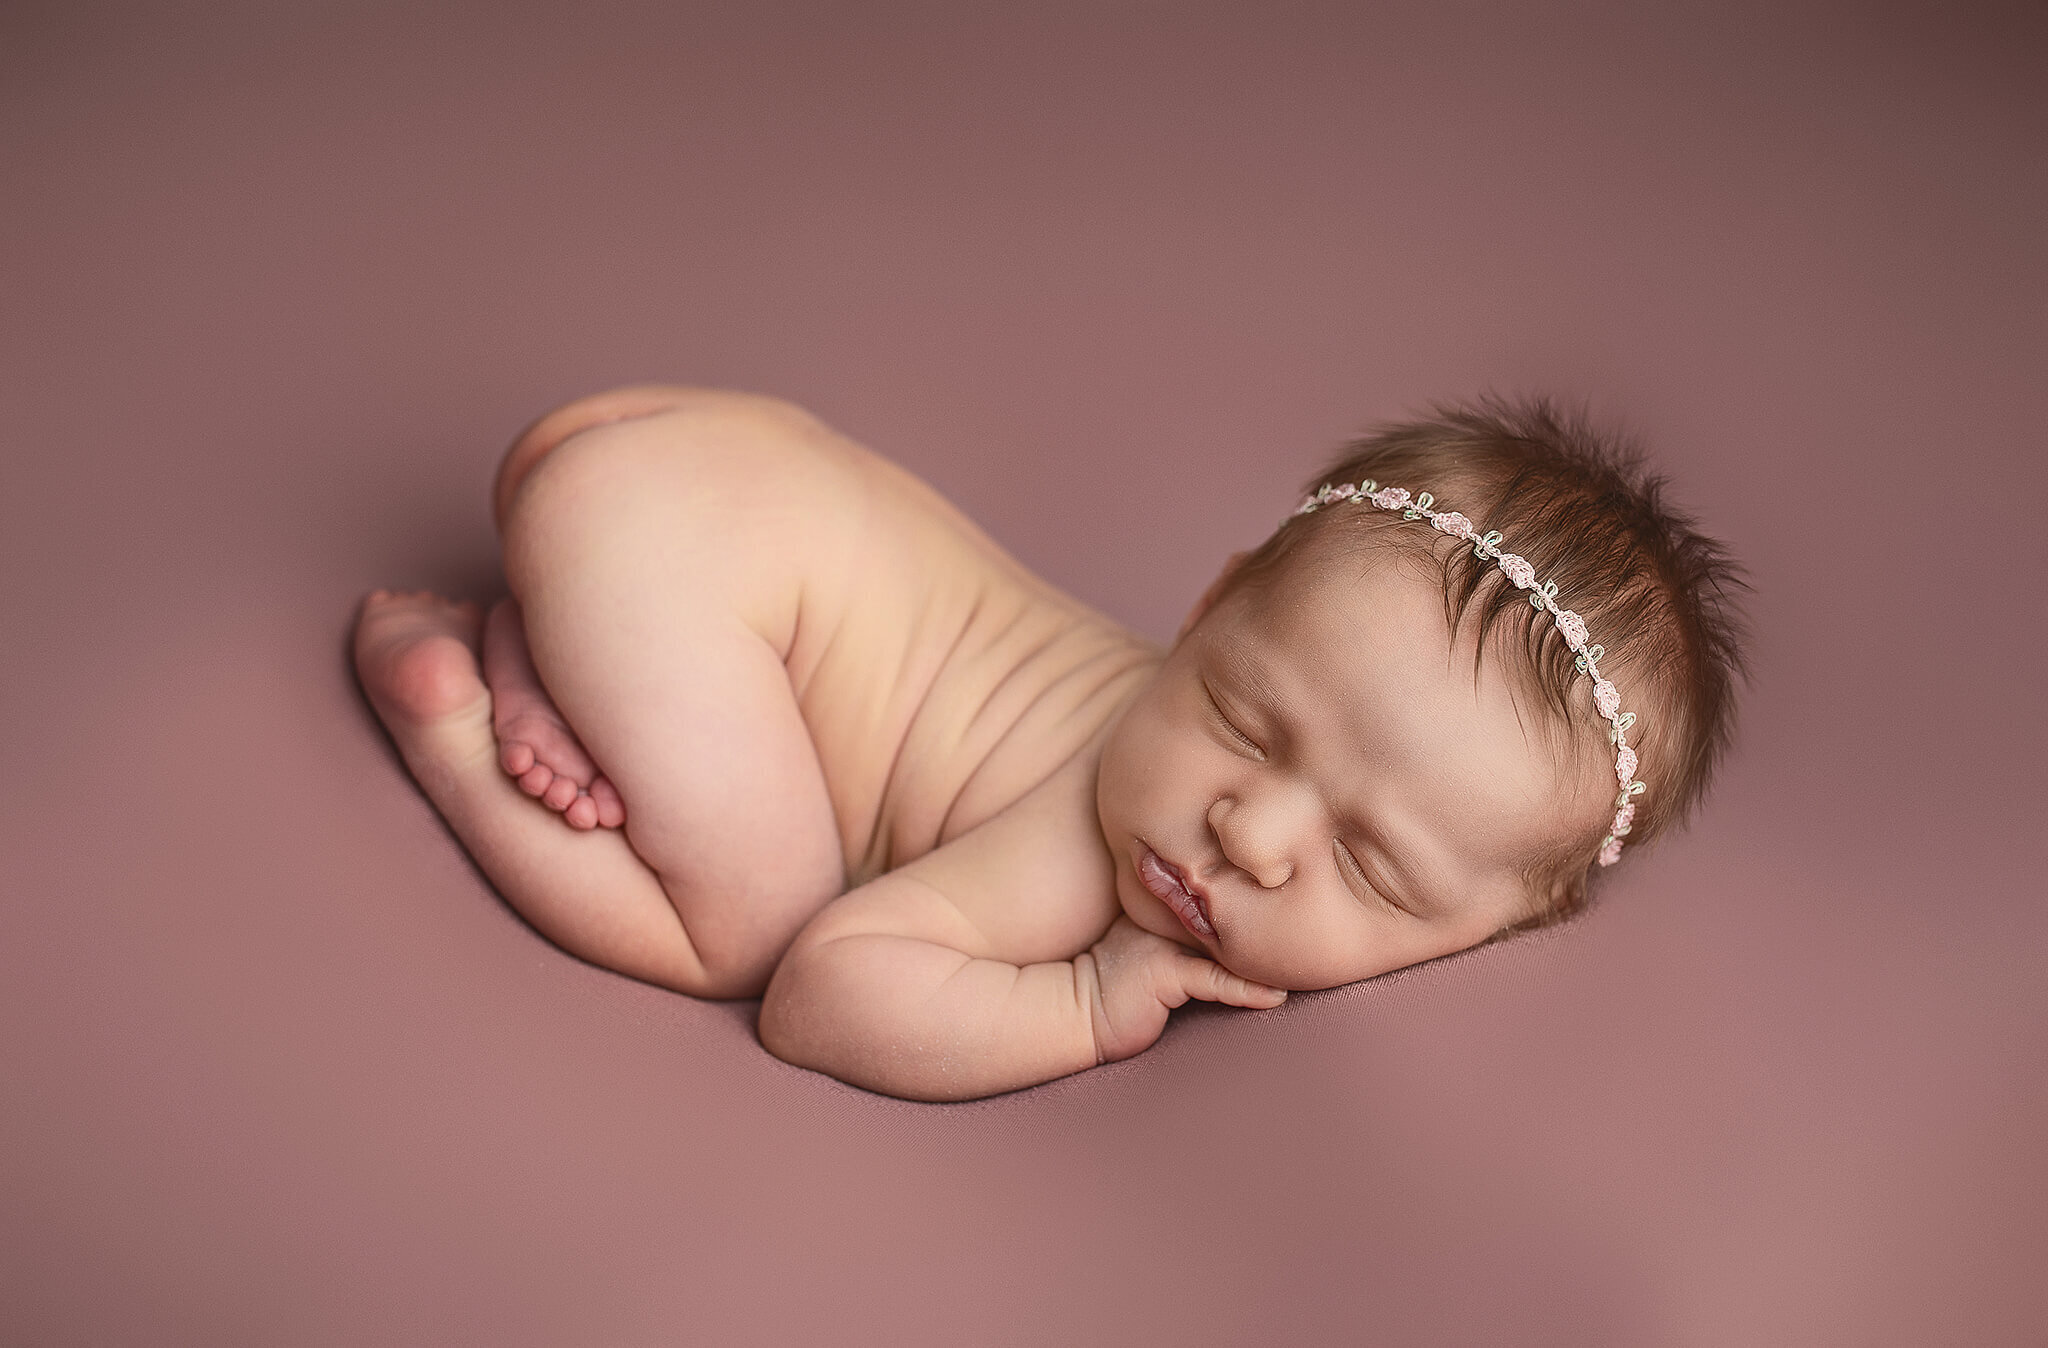 Newborn baby girl on pink blanket all snuggled up and sleeping